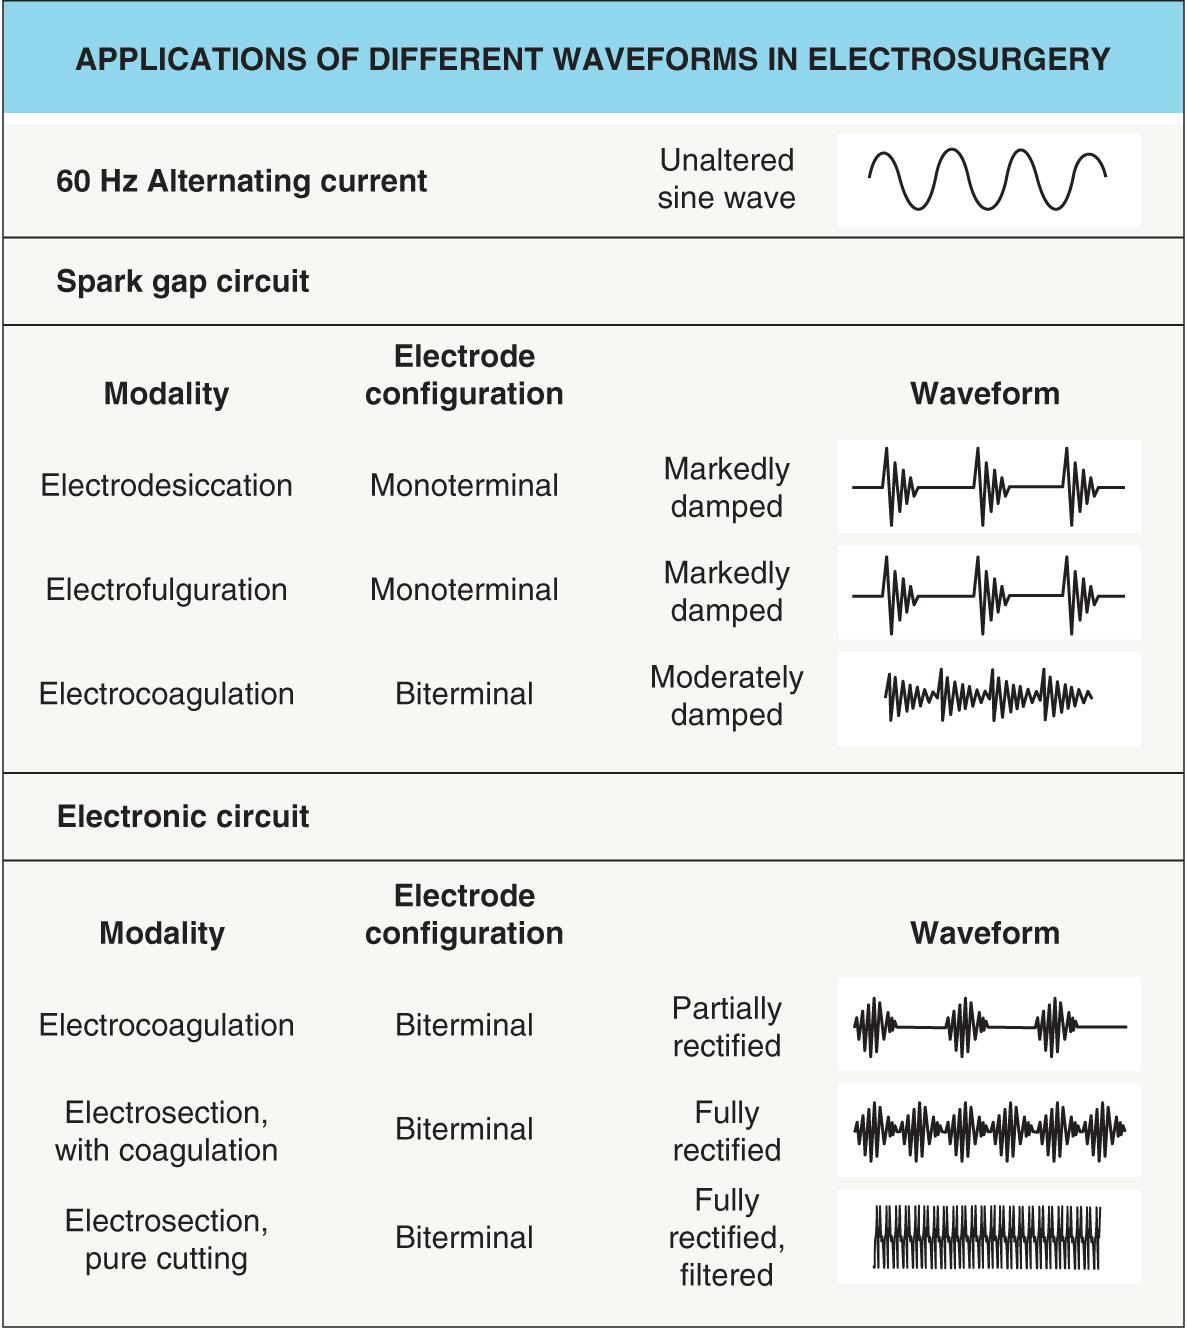 Fig. 140.2, Applications of different waveforms in electrosurgery.